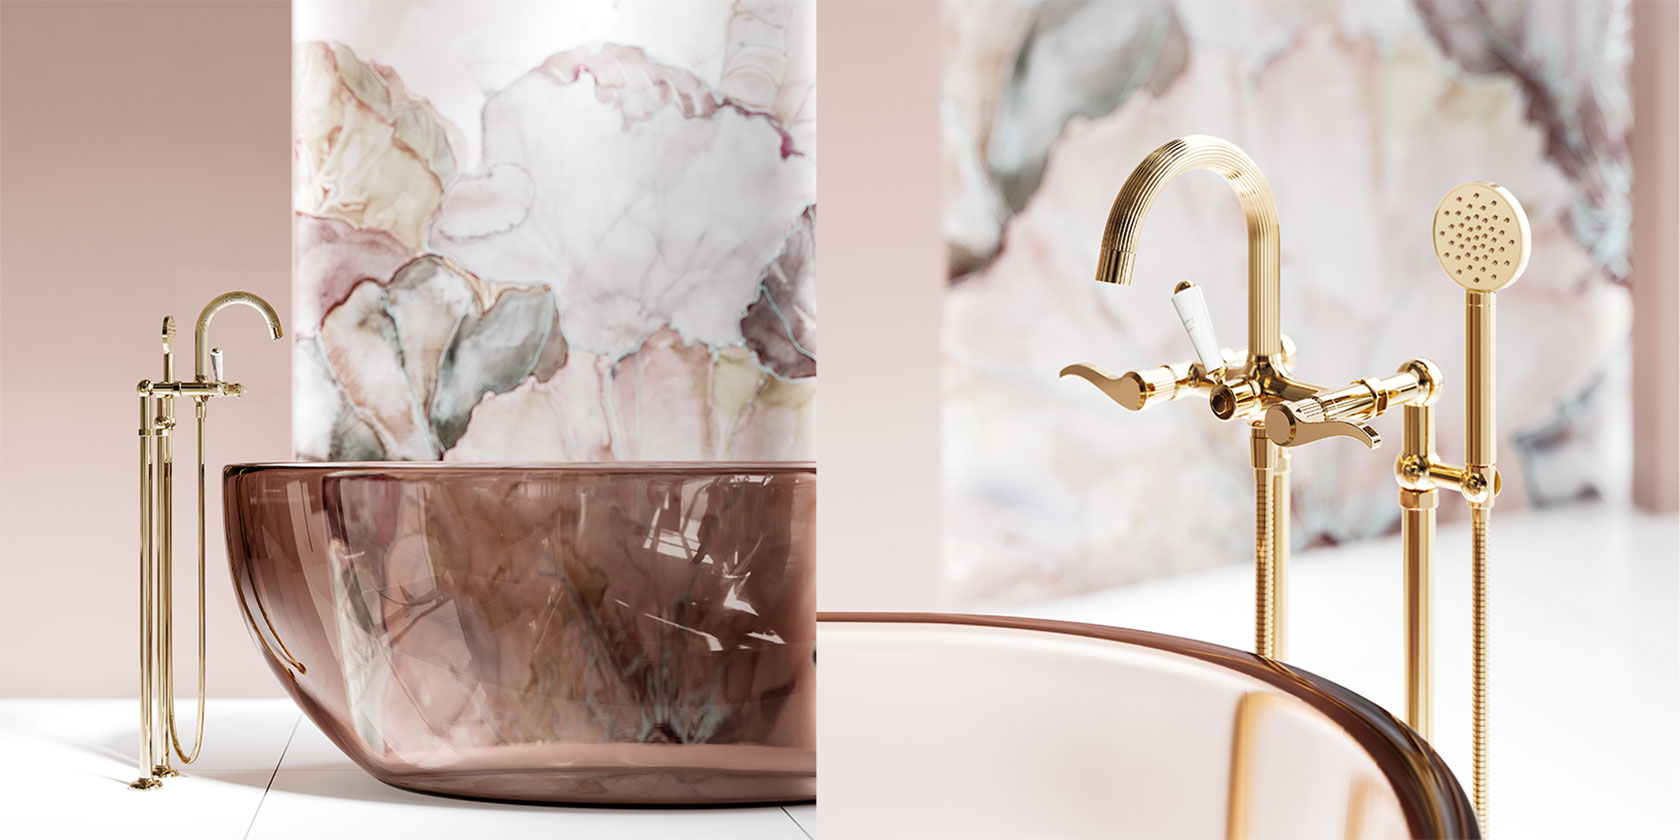 “La vie en rose” – Gentle romanticism and charming luxuries with “Cronos” in sunshine by Jörger Design